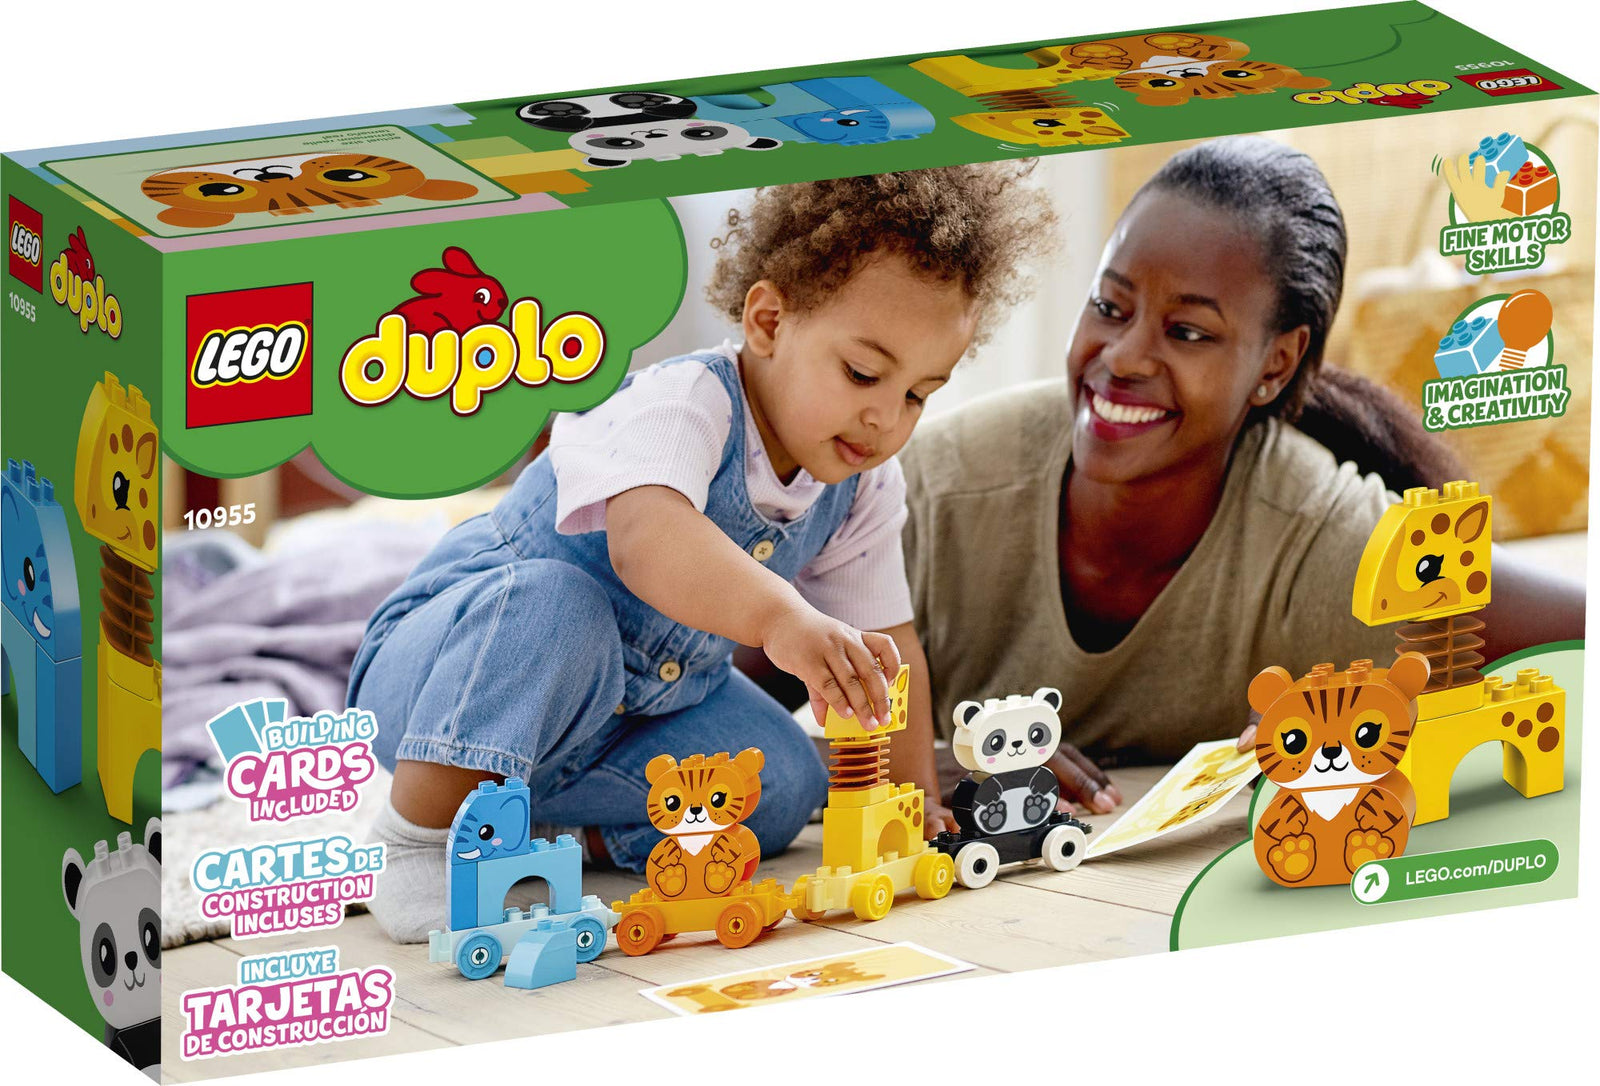 LEGO DUPLO My First Animal Train 10955 Pull-Along Toddlers’ Animal Toy with an Elephant, Tiger, Giraffe and Panda, New 2021 (15 Pieces)